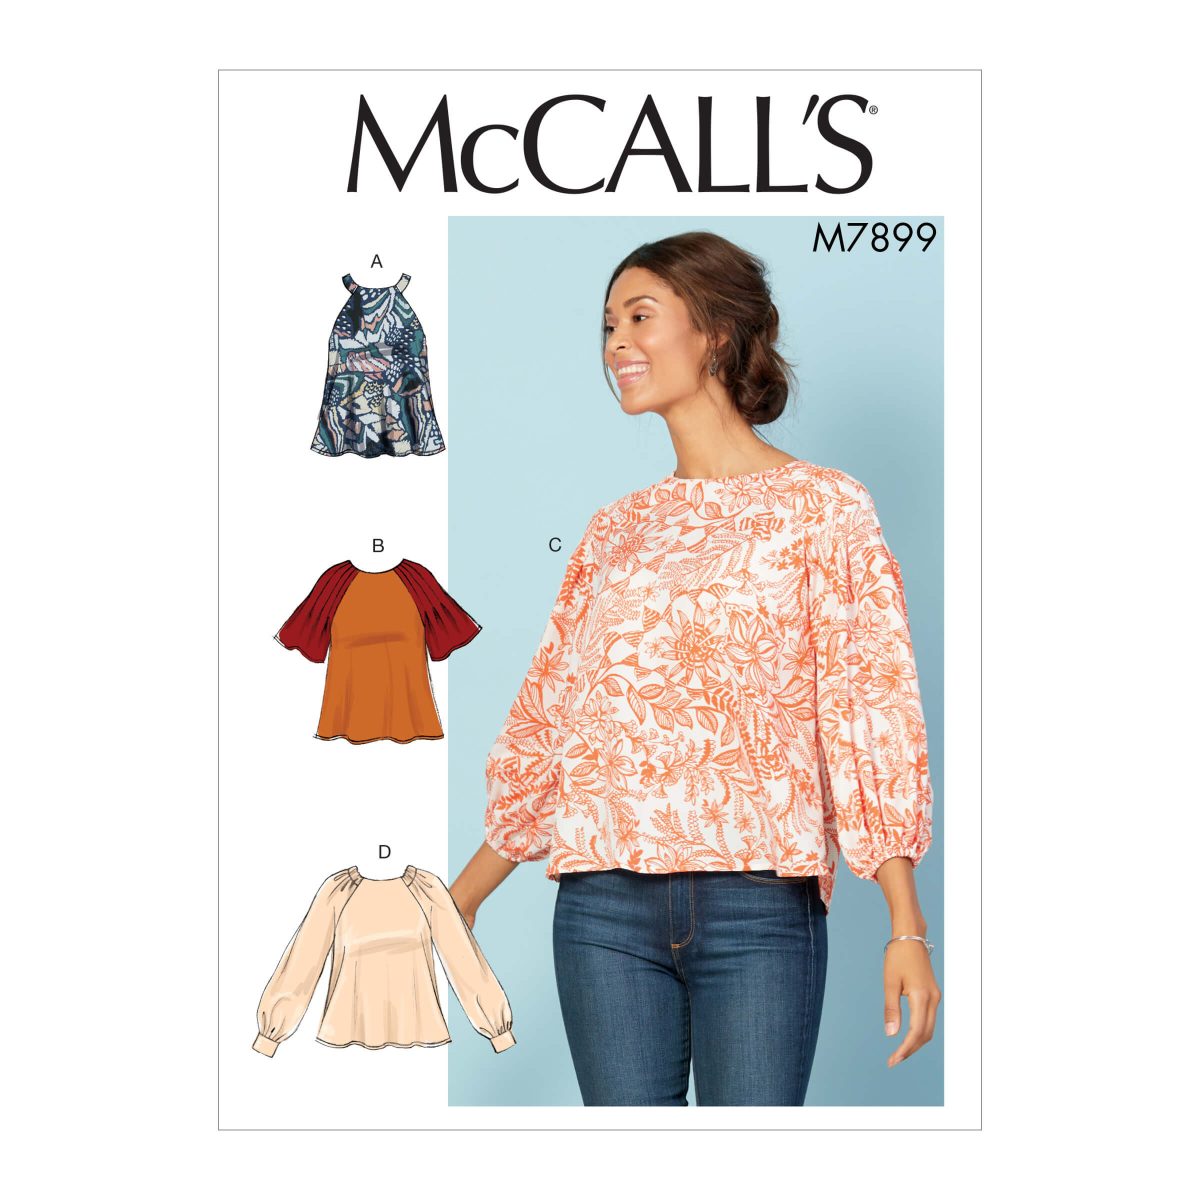 McCall's Sewing Pattern M7899 Misses' Tops